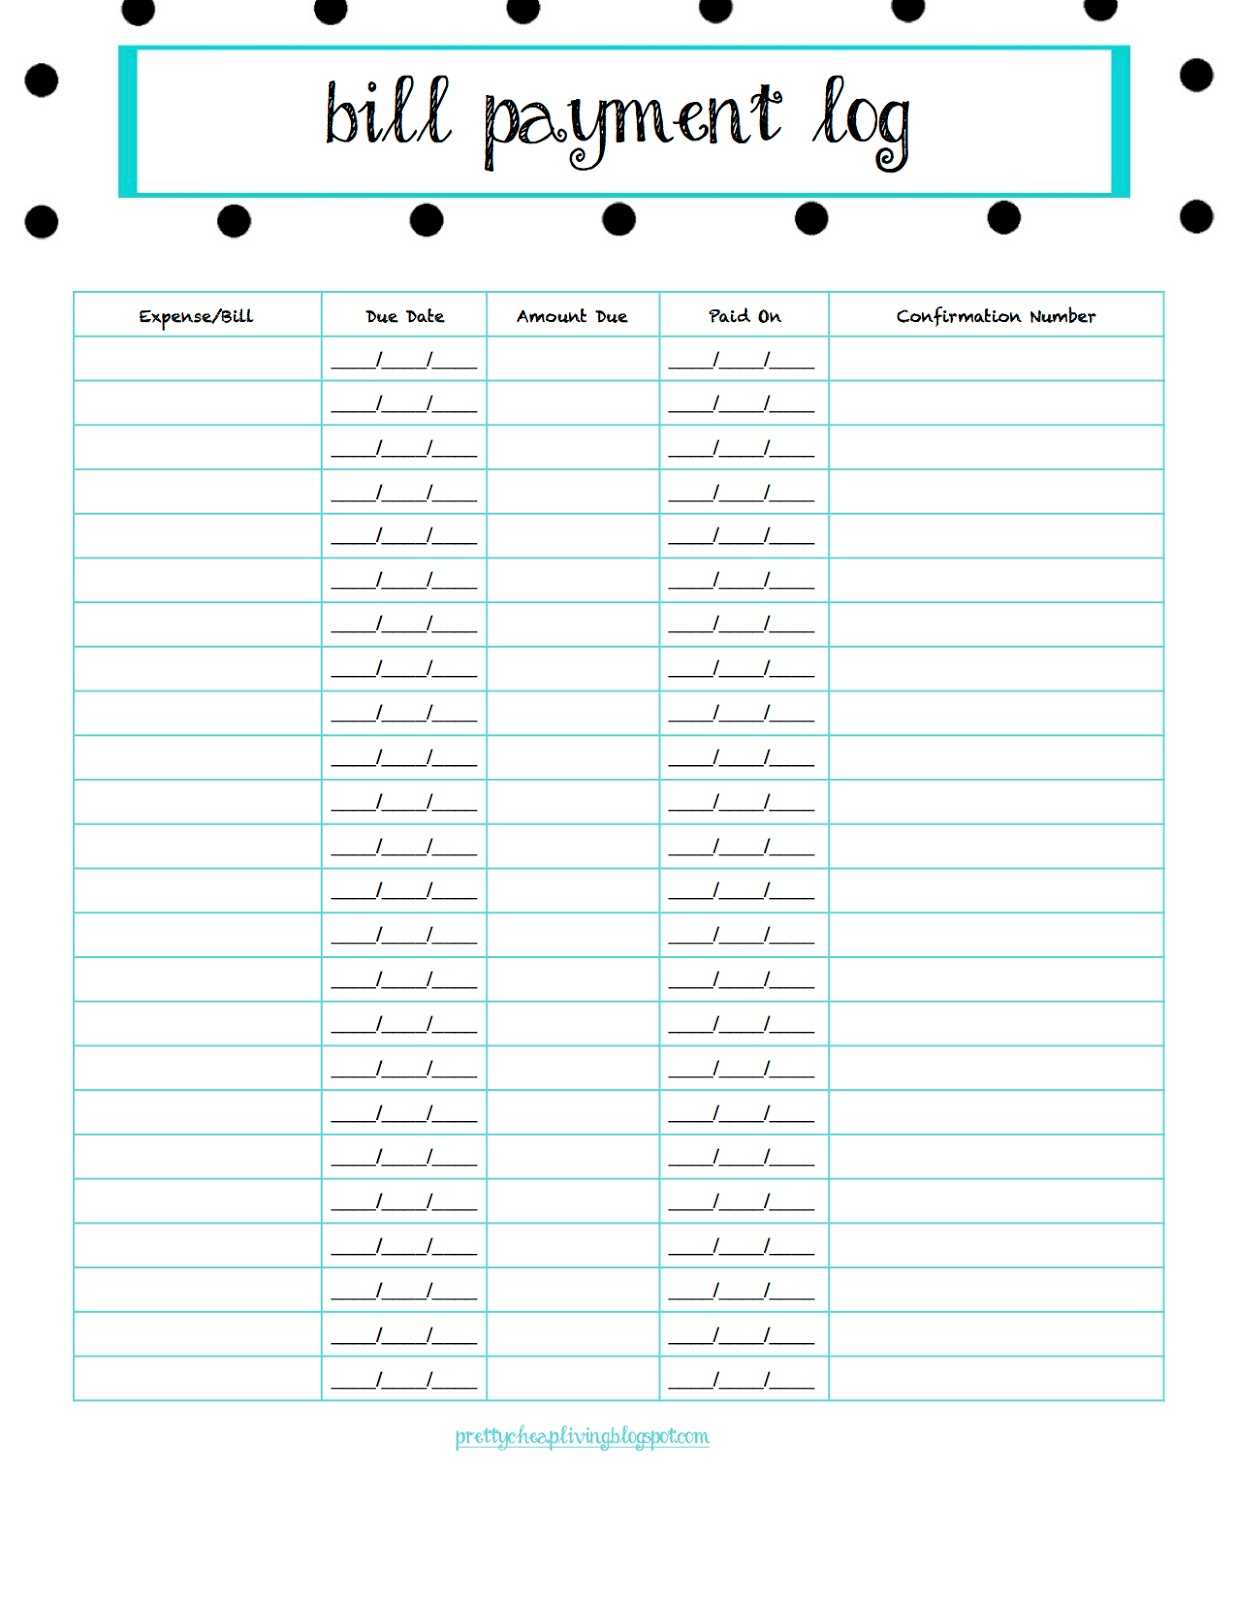 Pretty Cheap Living : Bill Payment Log Free Printable with Bill Payment Chart